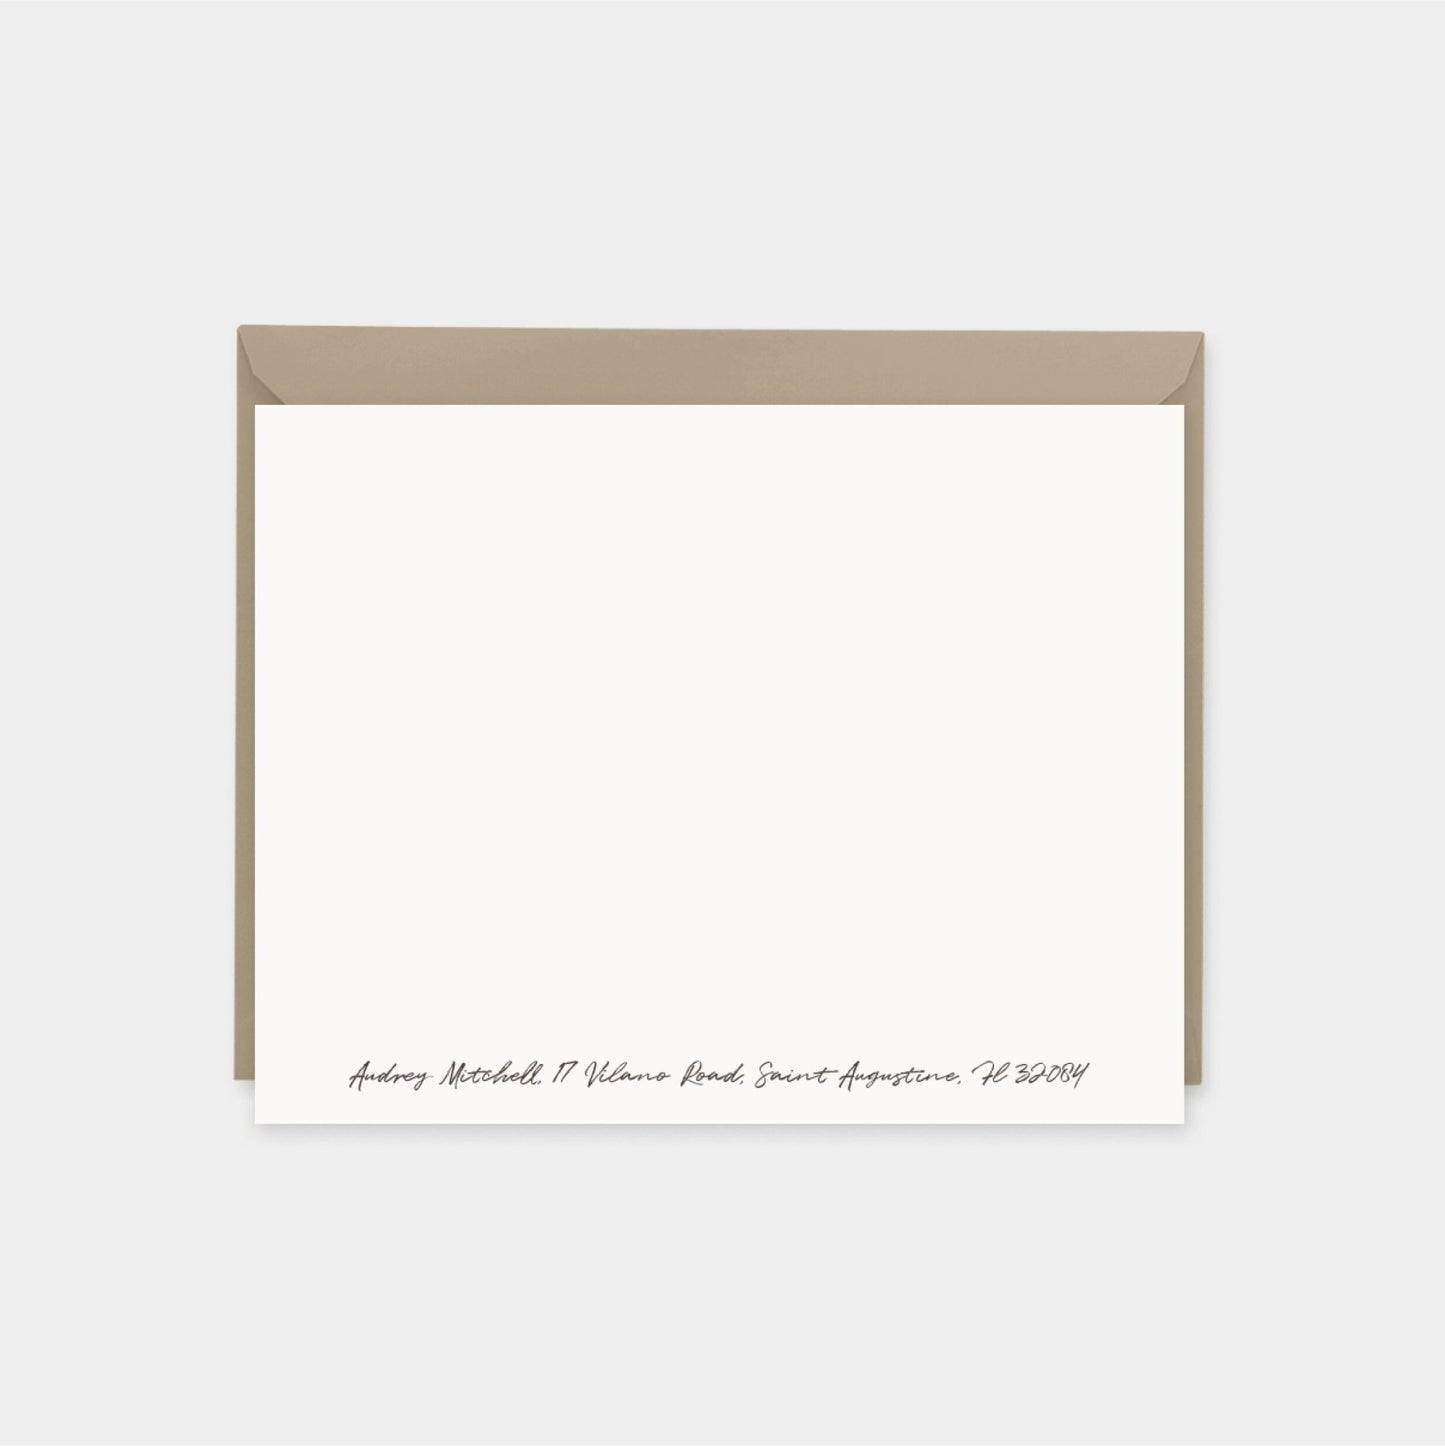 Light Blue Speckled Texture Note Cards,